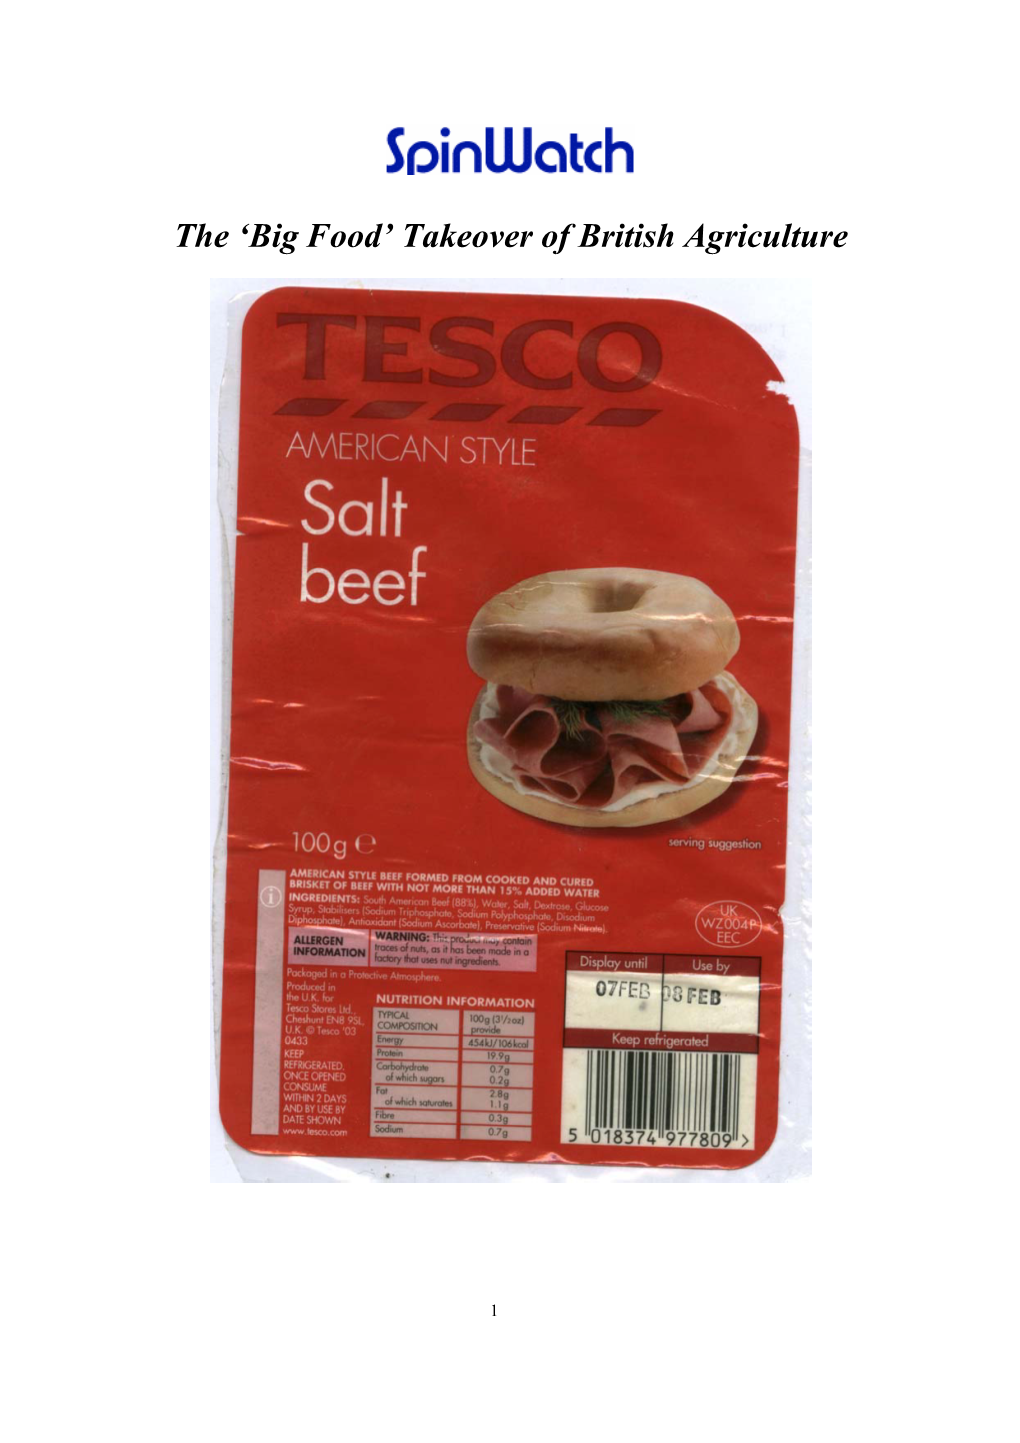 The 'Big Food' Takeover of British Agriculture